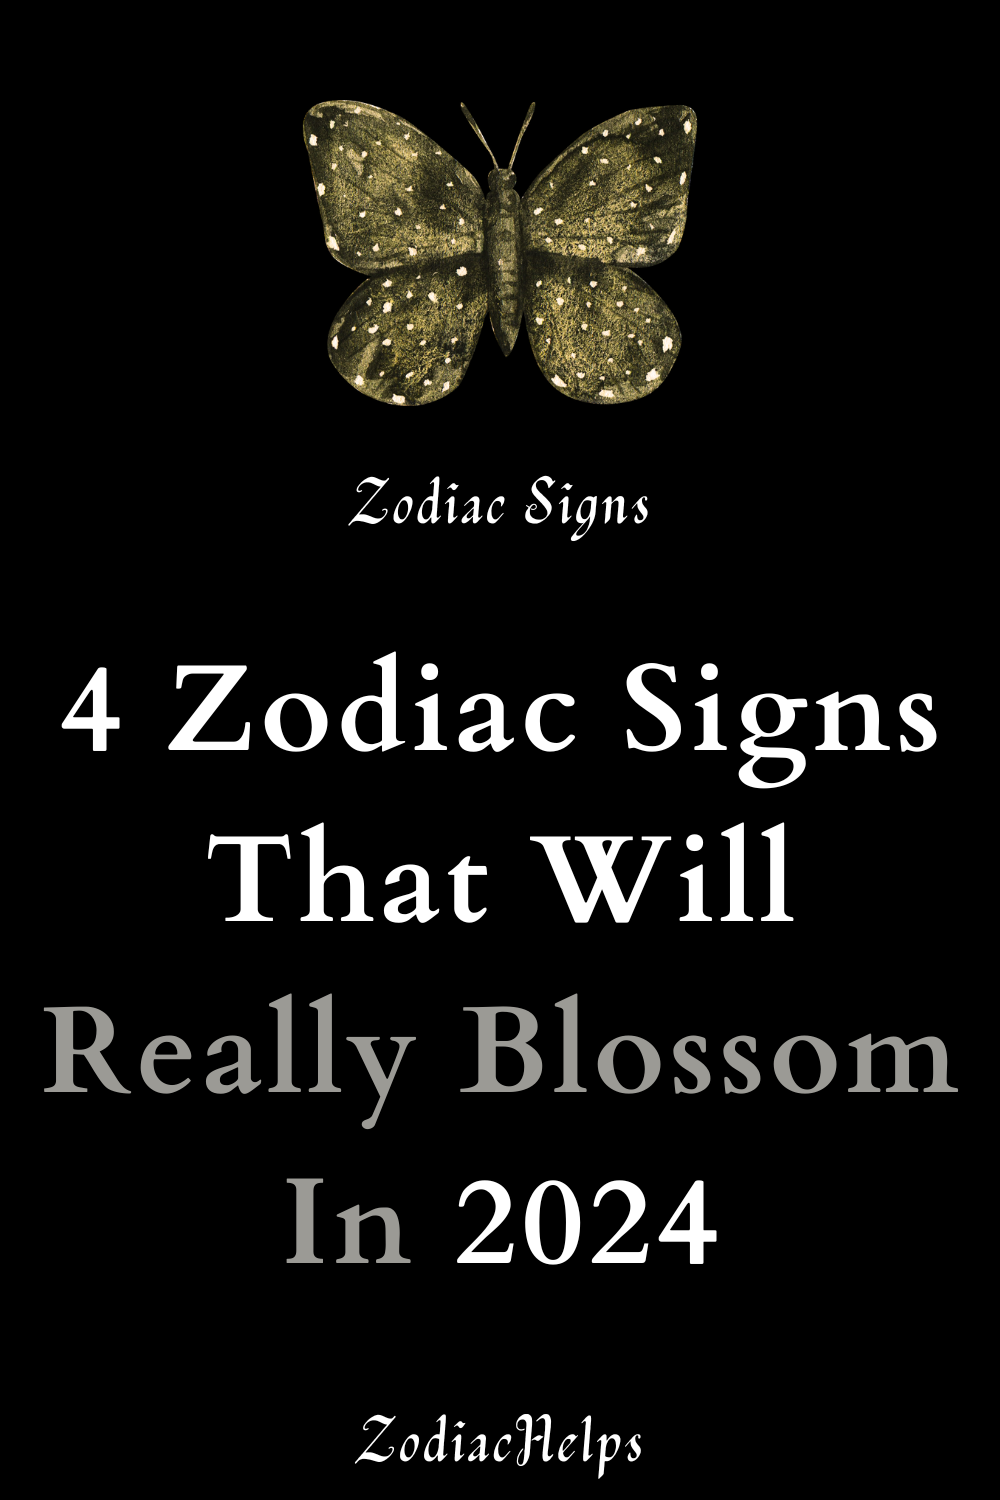 4 Zodiac Signs That Will Really Blossom In 2024